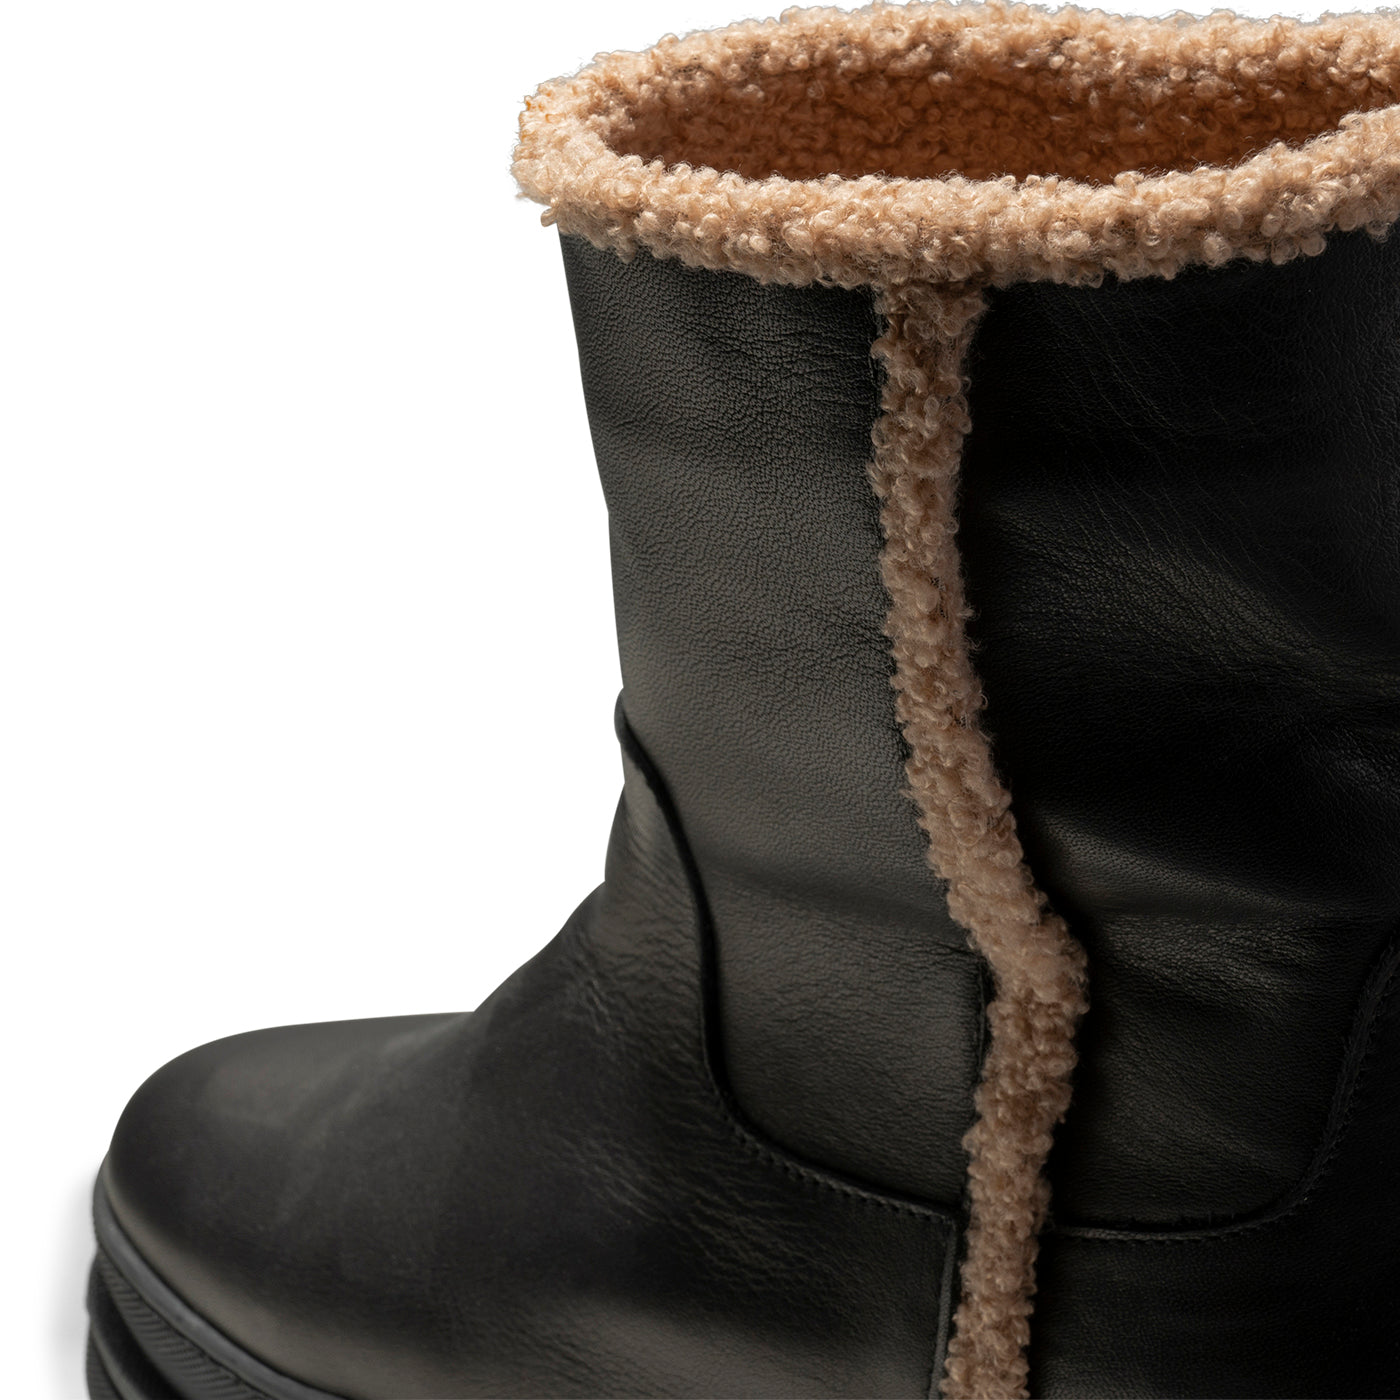 SHOE THE BEAR WOMENS Olga boot leather warm Boots 110 BLACK